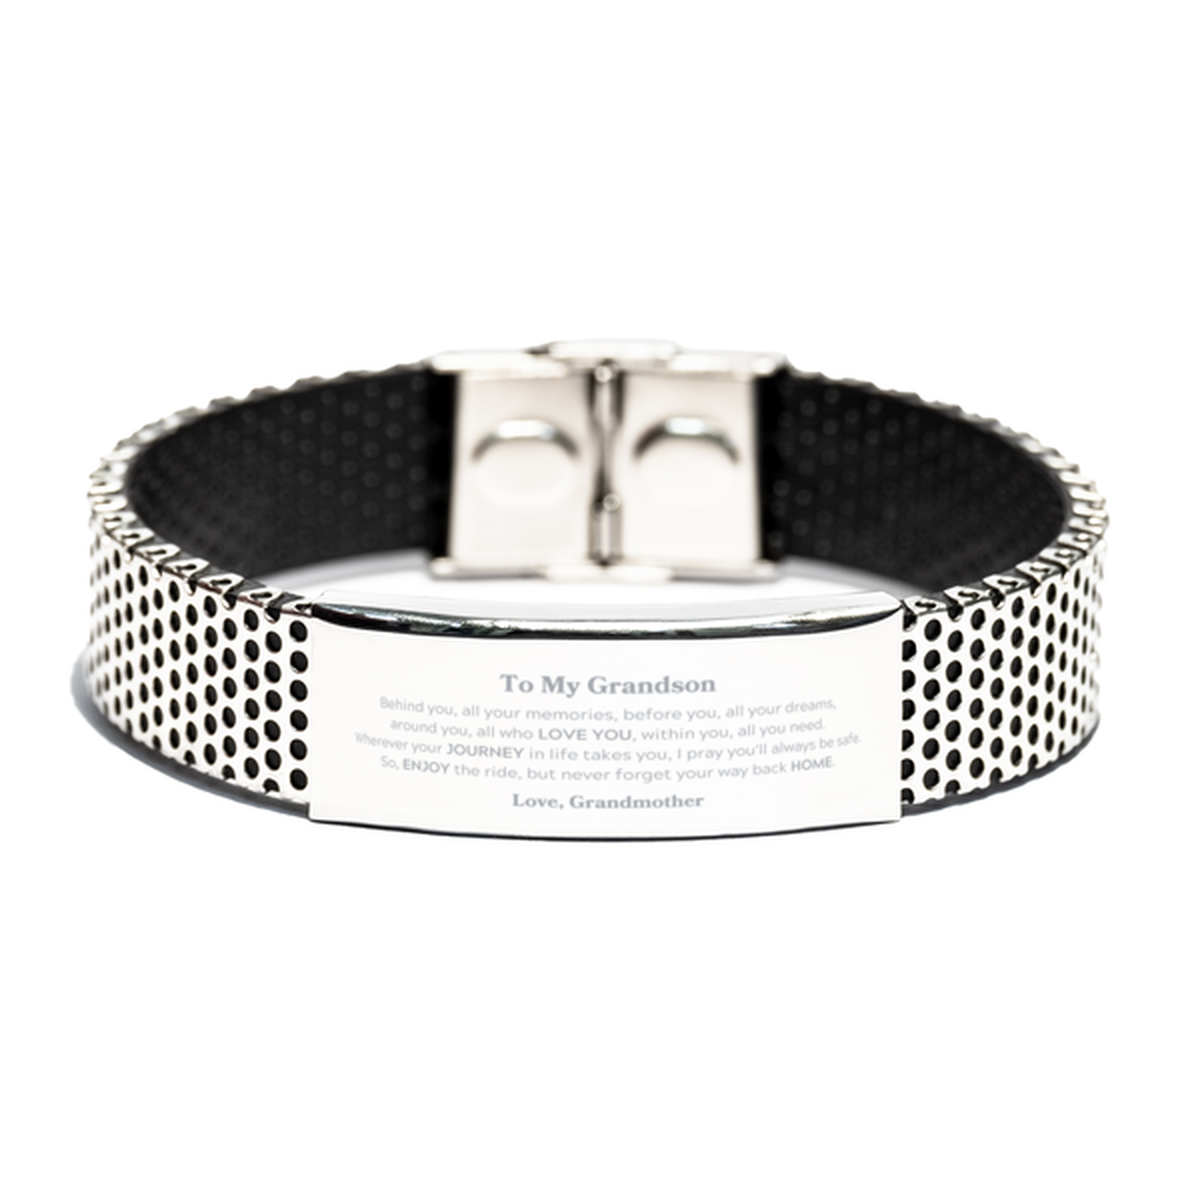 To My Grandson Graduation Gifts from Grandmother, Grandson Stainless Steel Bracelet Christmas Birthday Gifts for Grandson Behind you, all your memories, before you, all your dreams. Love, Grandmother